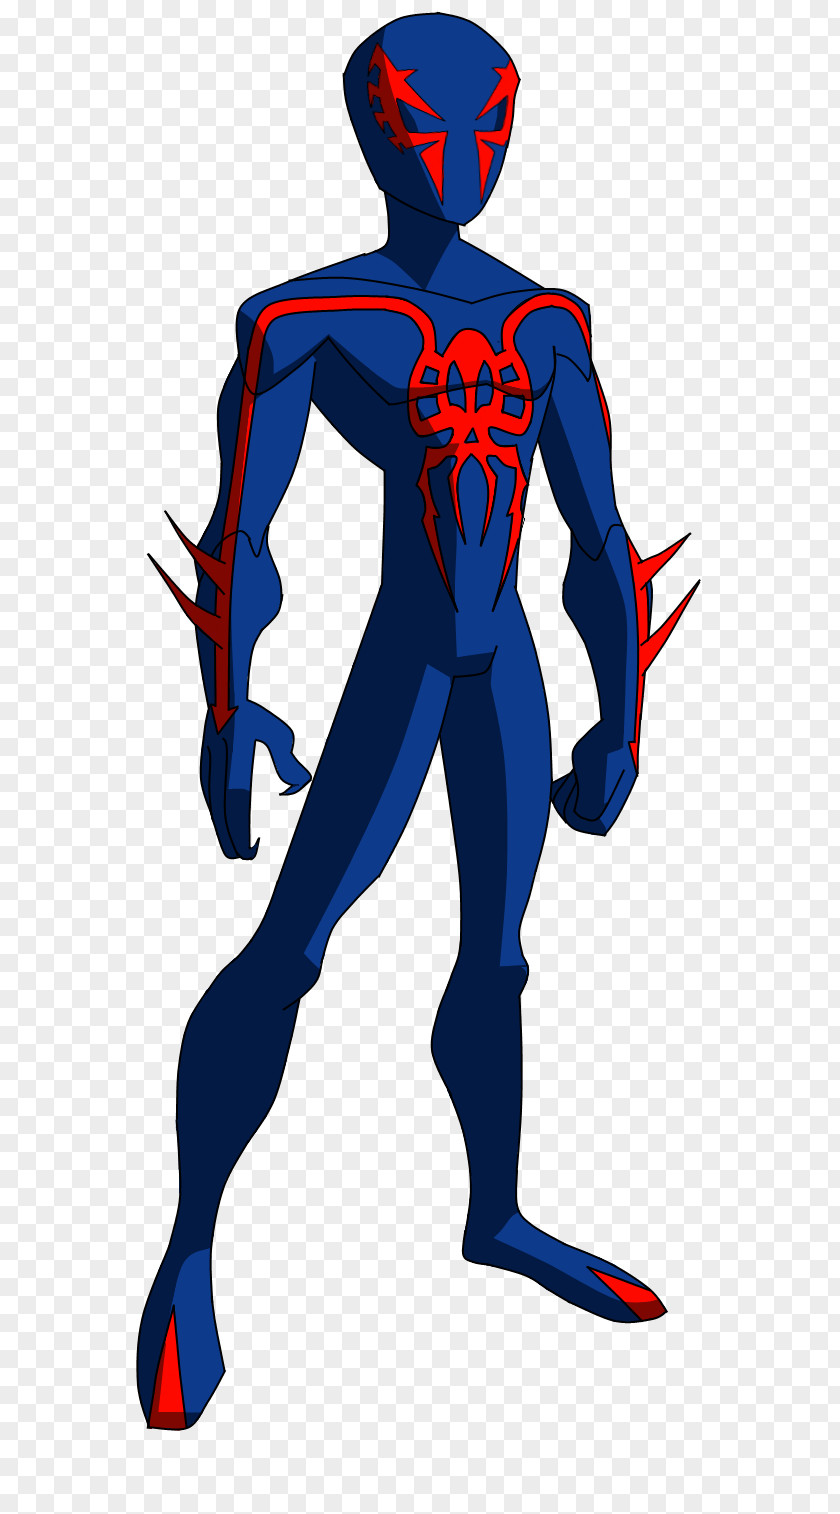 Takeout Superman The Spectacular Spider-Man Venom Drawing Symbiote PNG